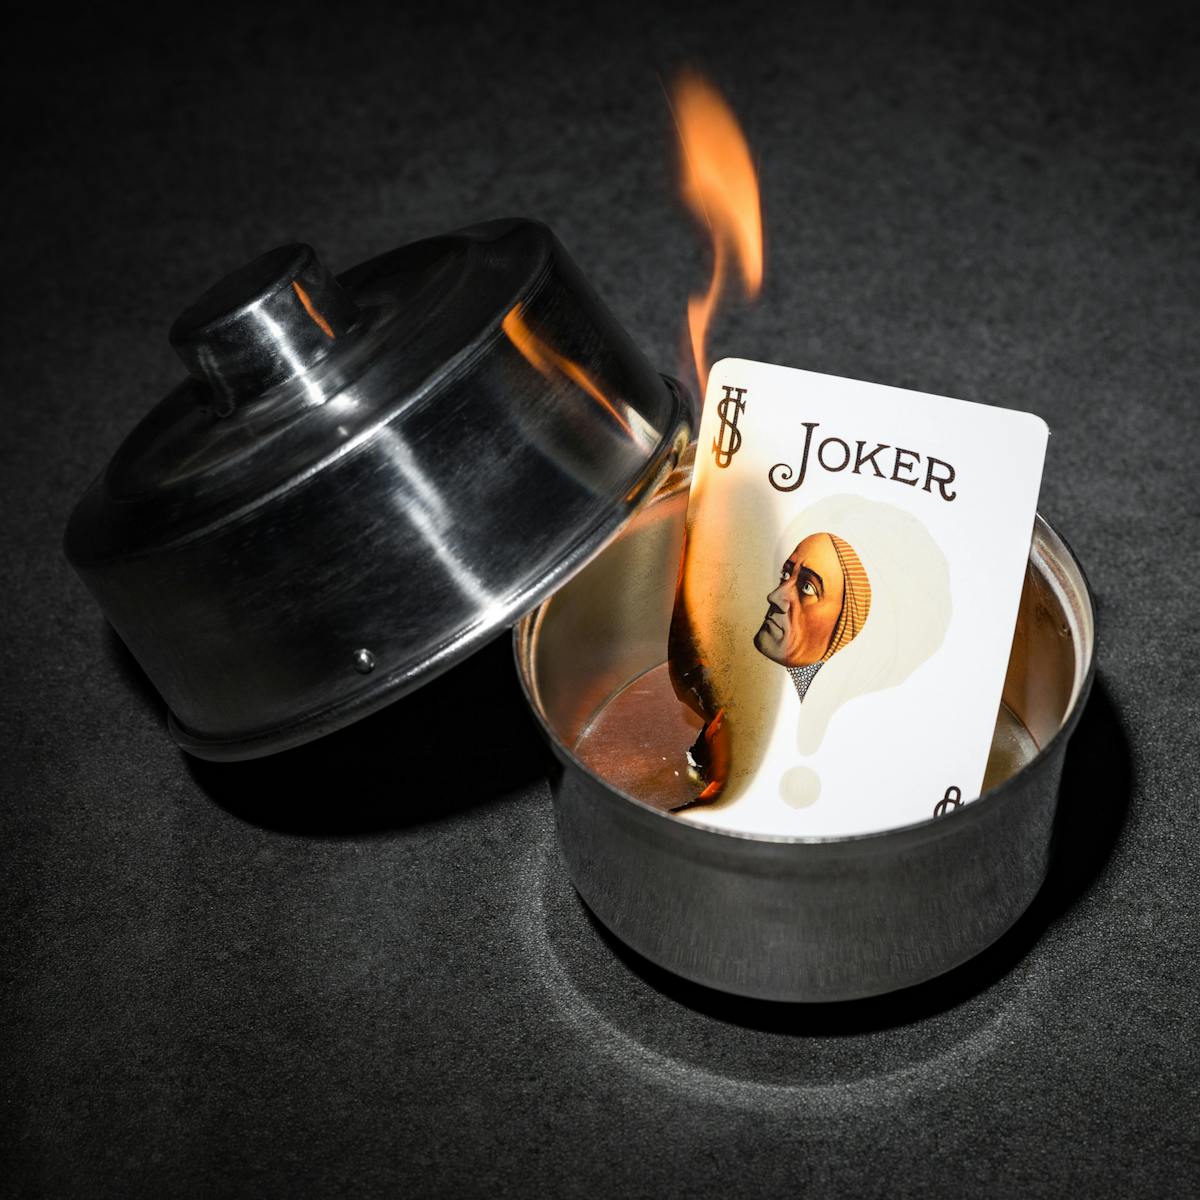 Photograph of a burning joker card in a silver dish. On the card is the face of the 1920s mind reader, Alexander.